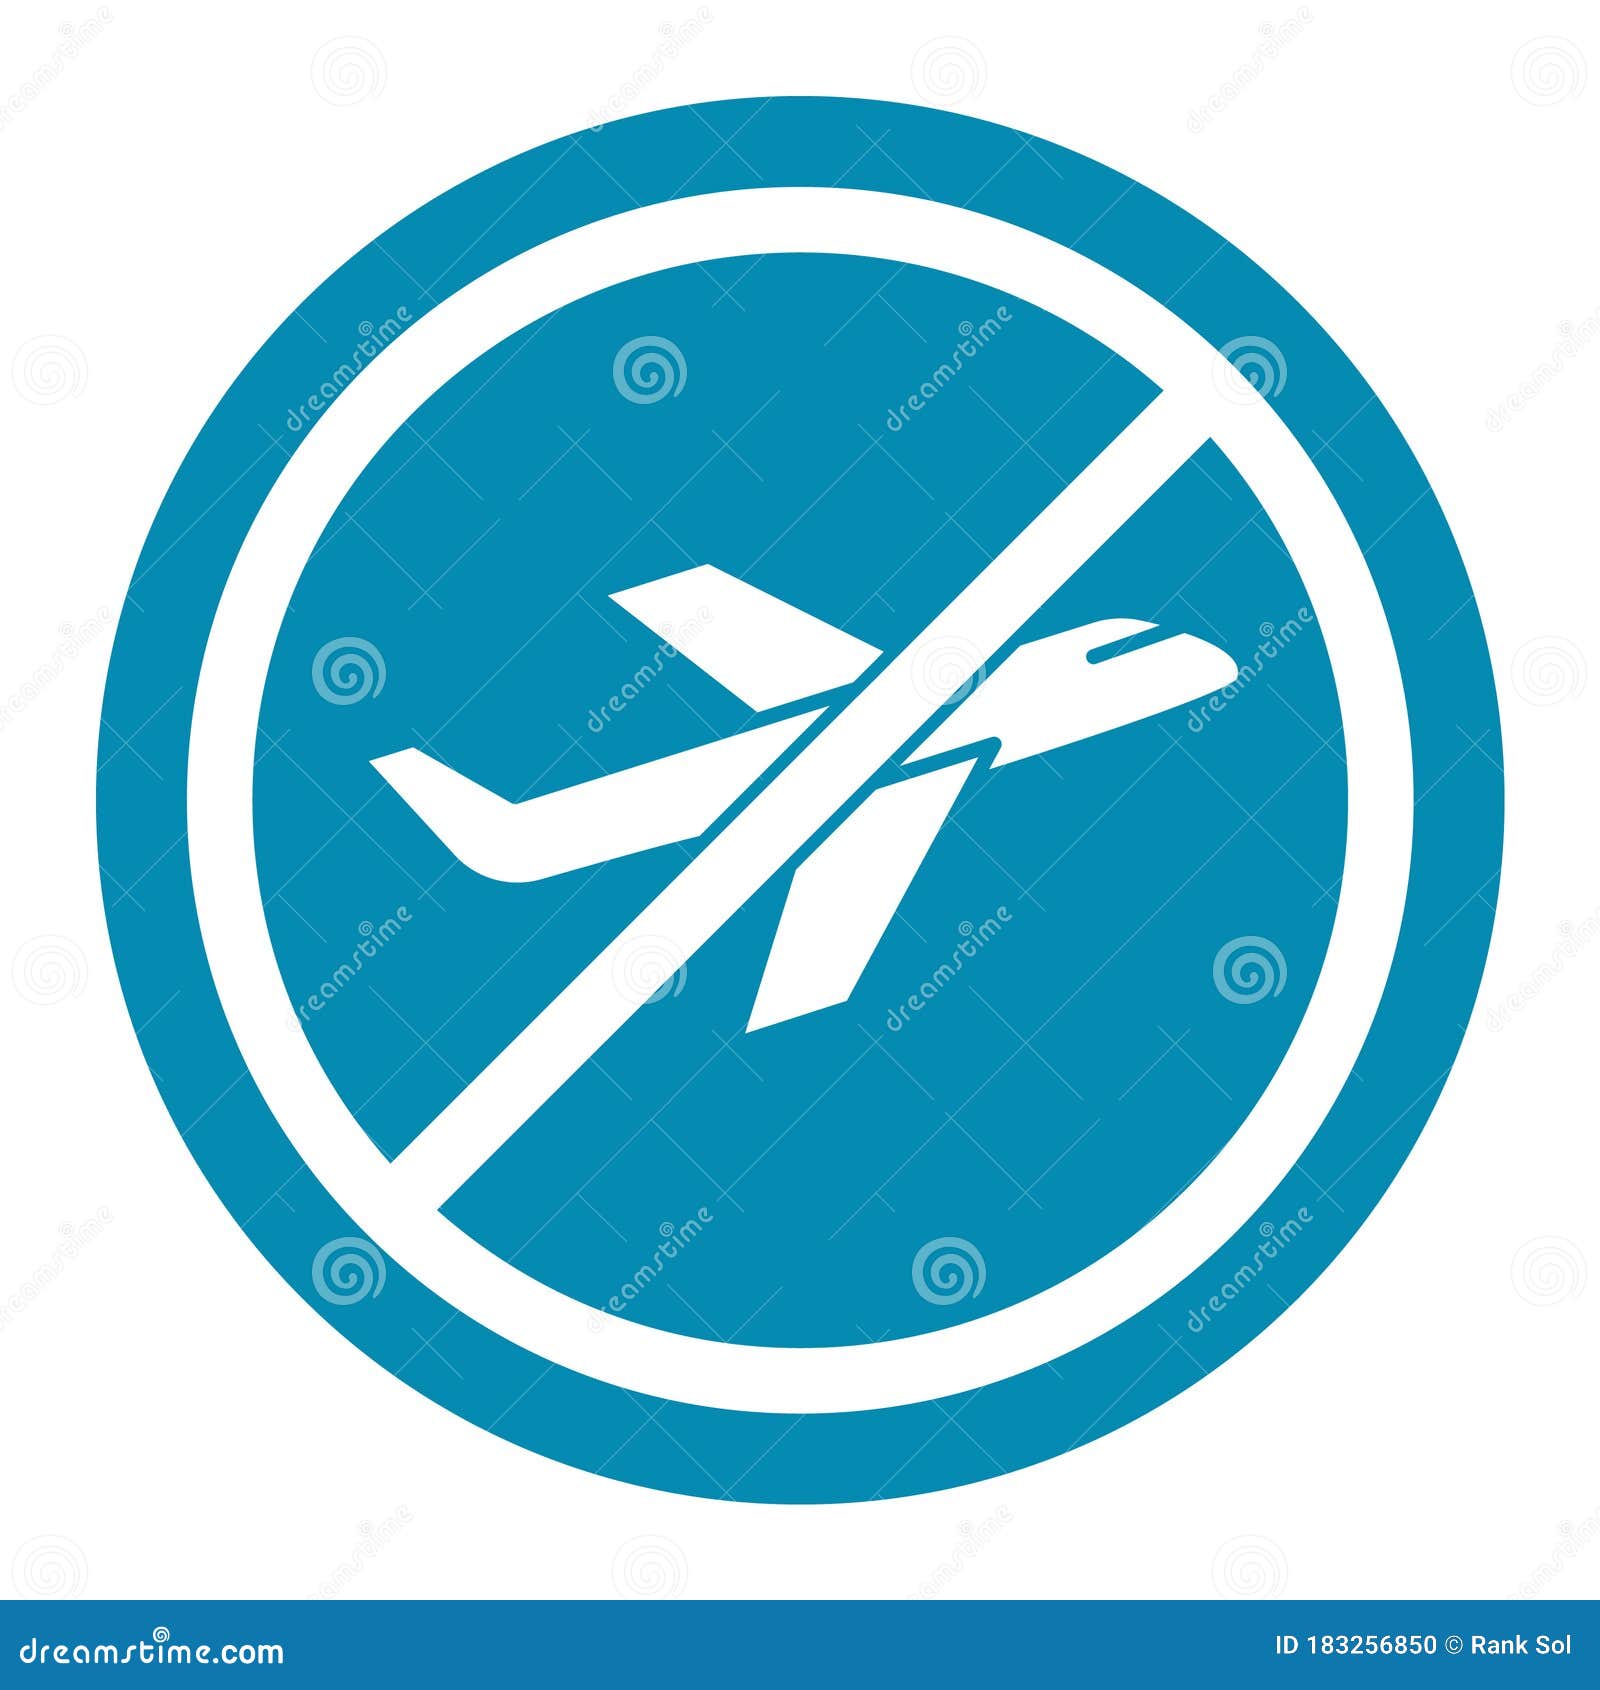 no flight during coronavirus  glyph style  icon which can easily modify or edit